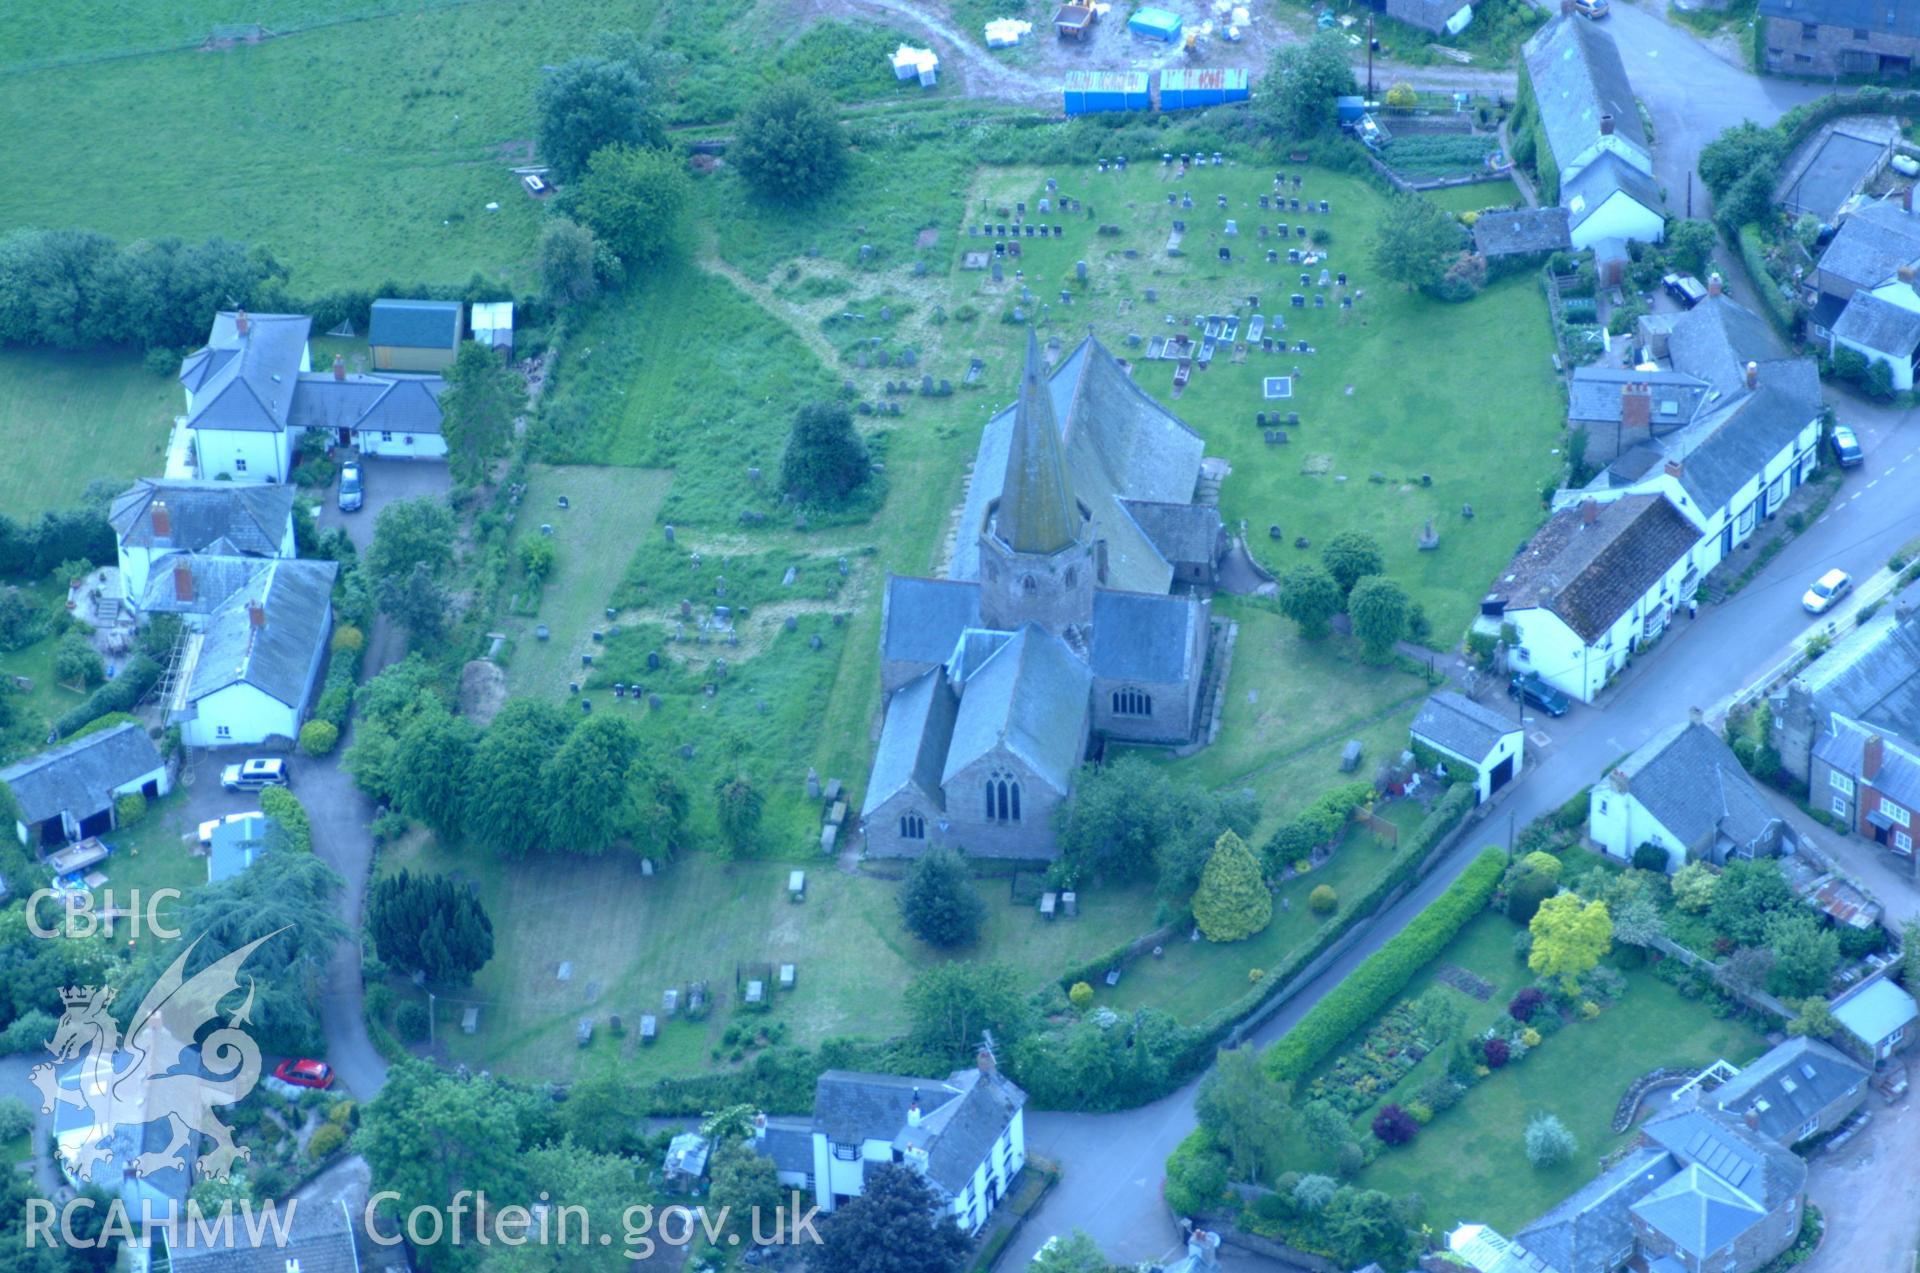 RCAHMW colour oblique aerial photograph of St Nicholas' Church, Grosmont taken on 02/06/2004 by Toby Driver